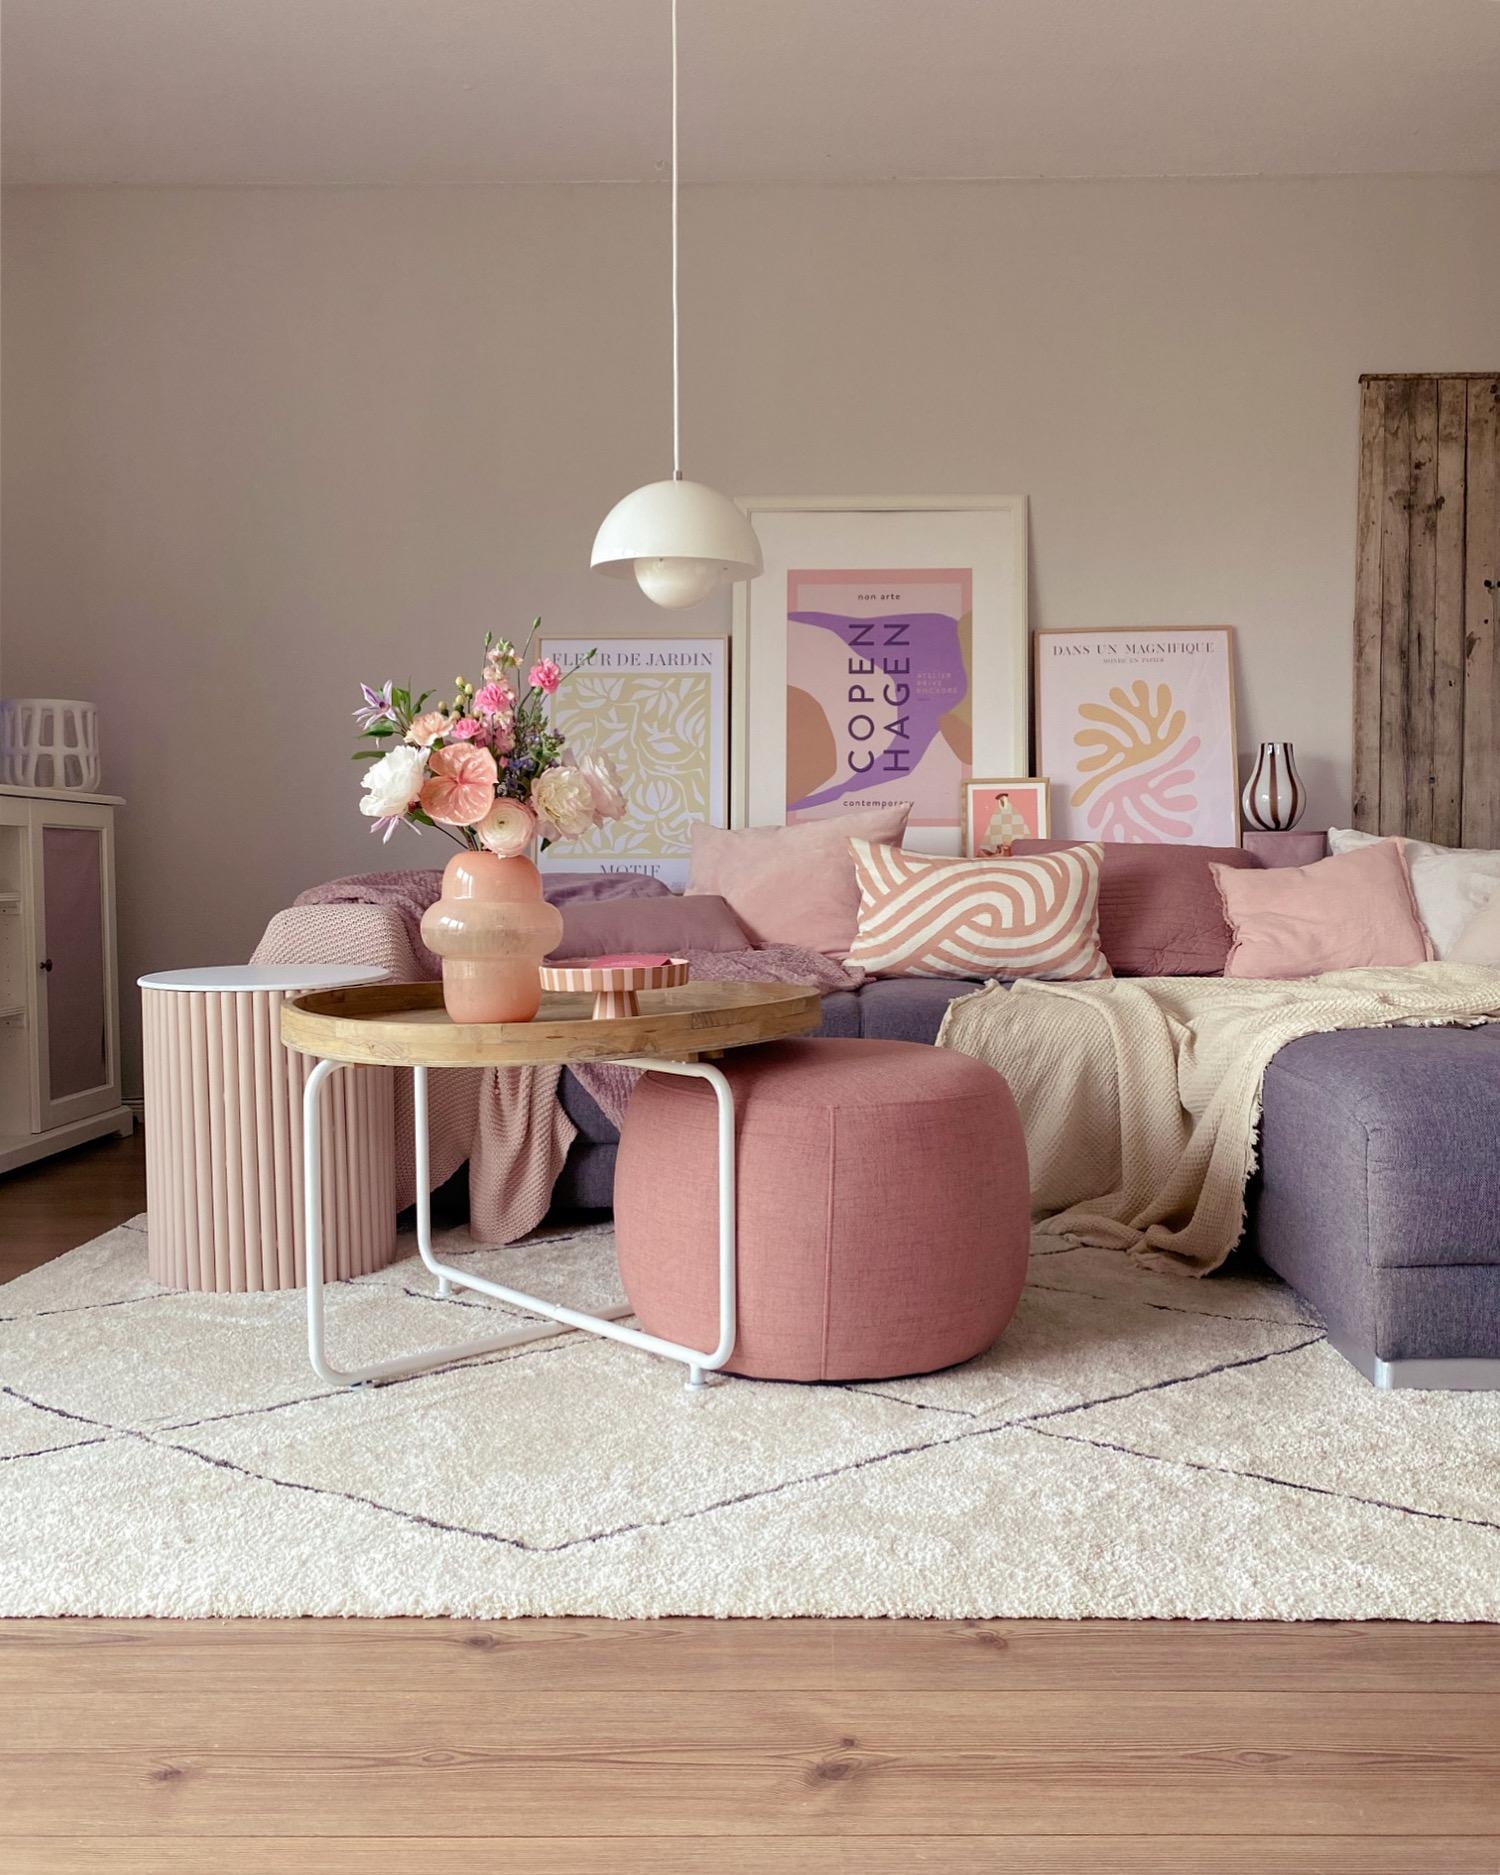 Rosa is my happy colour...
#wohnzimmer#wohnideen#couchstyle#colourmatch#livingroominspo#cozyhome